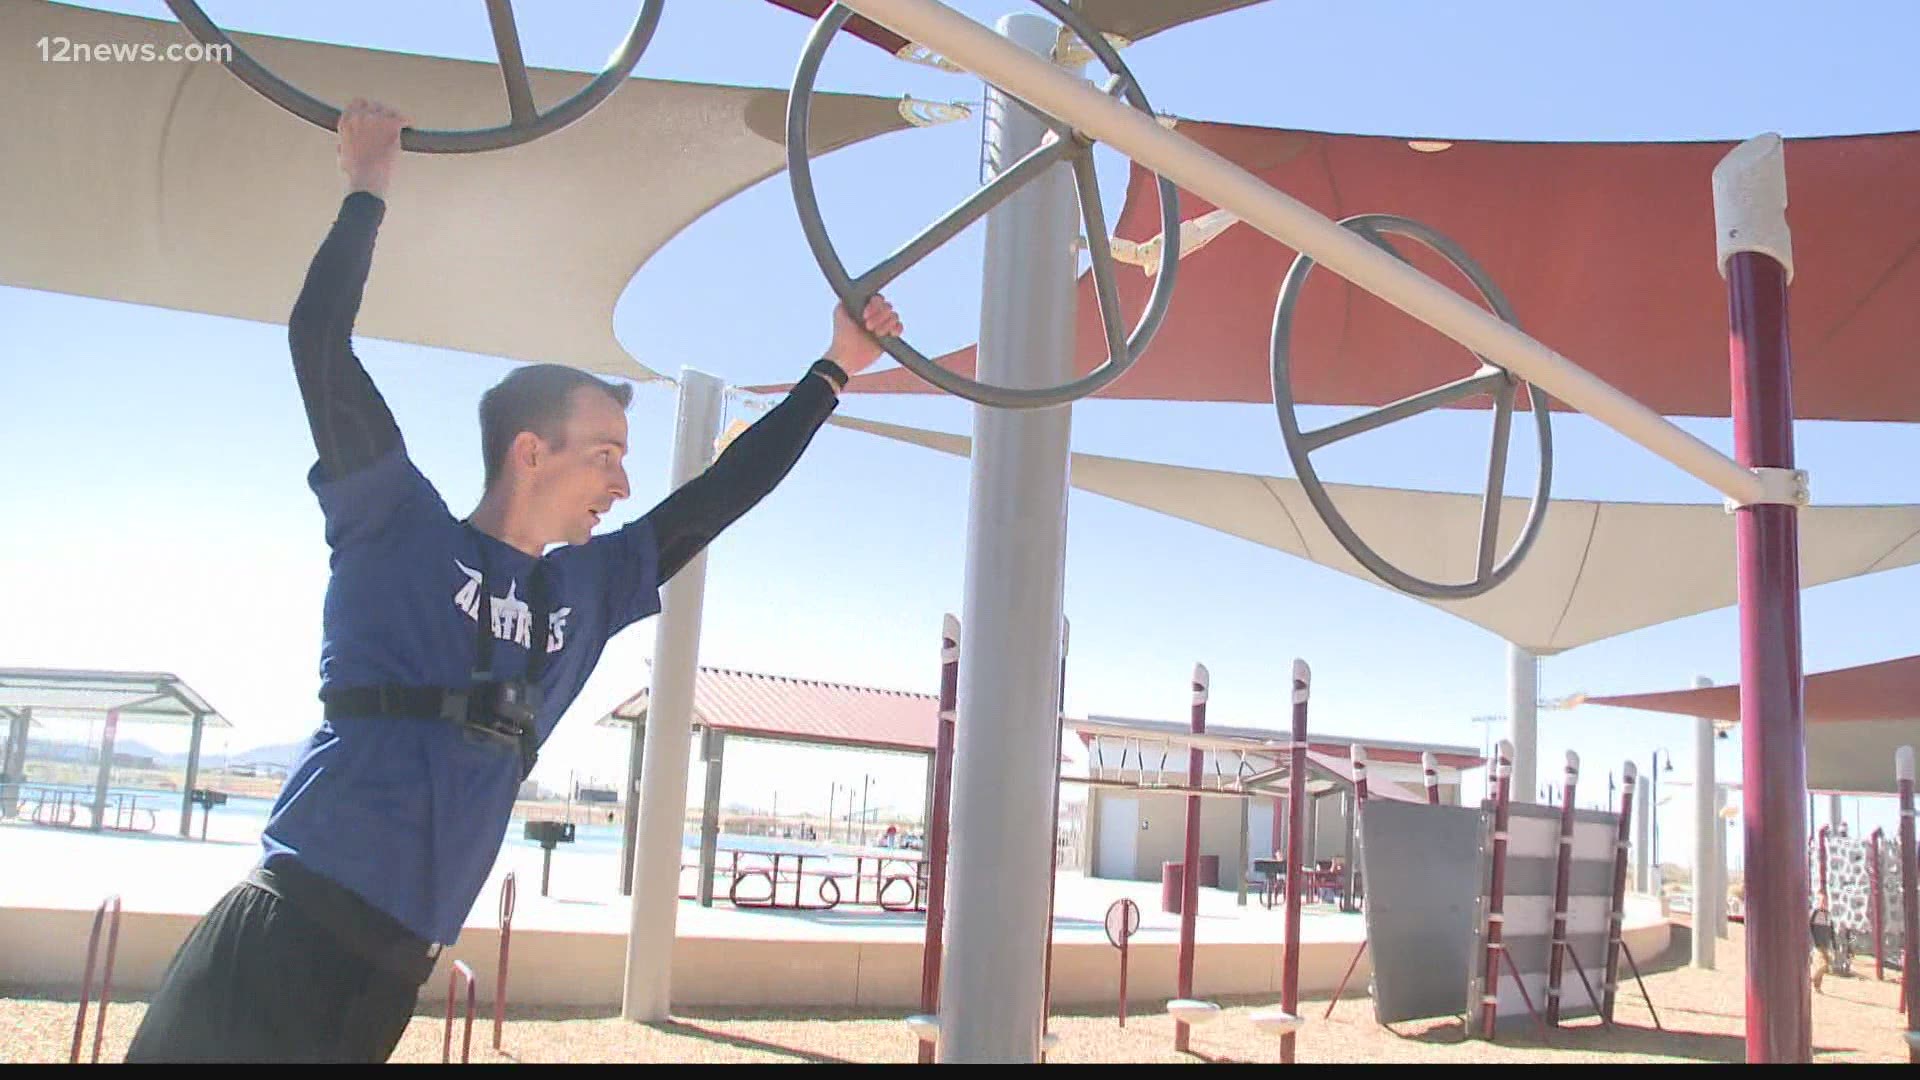 This season of 'American Ninja Warrior' new, harder obstacles are being introduced. And one Goodyear man is ready to take on the new challenges.